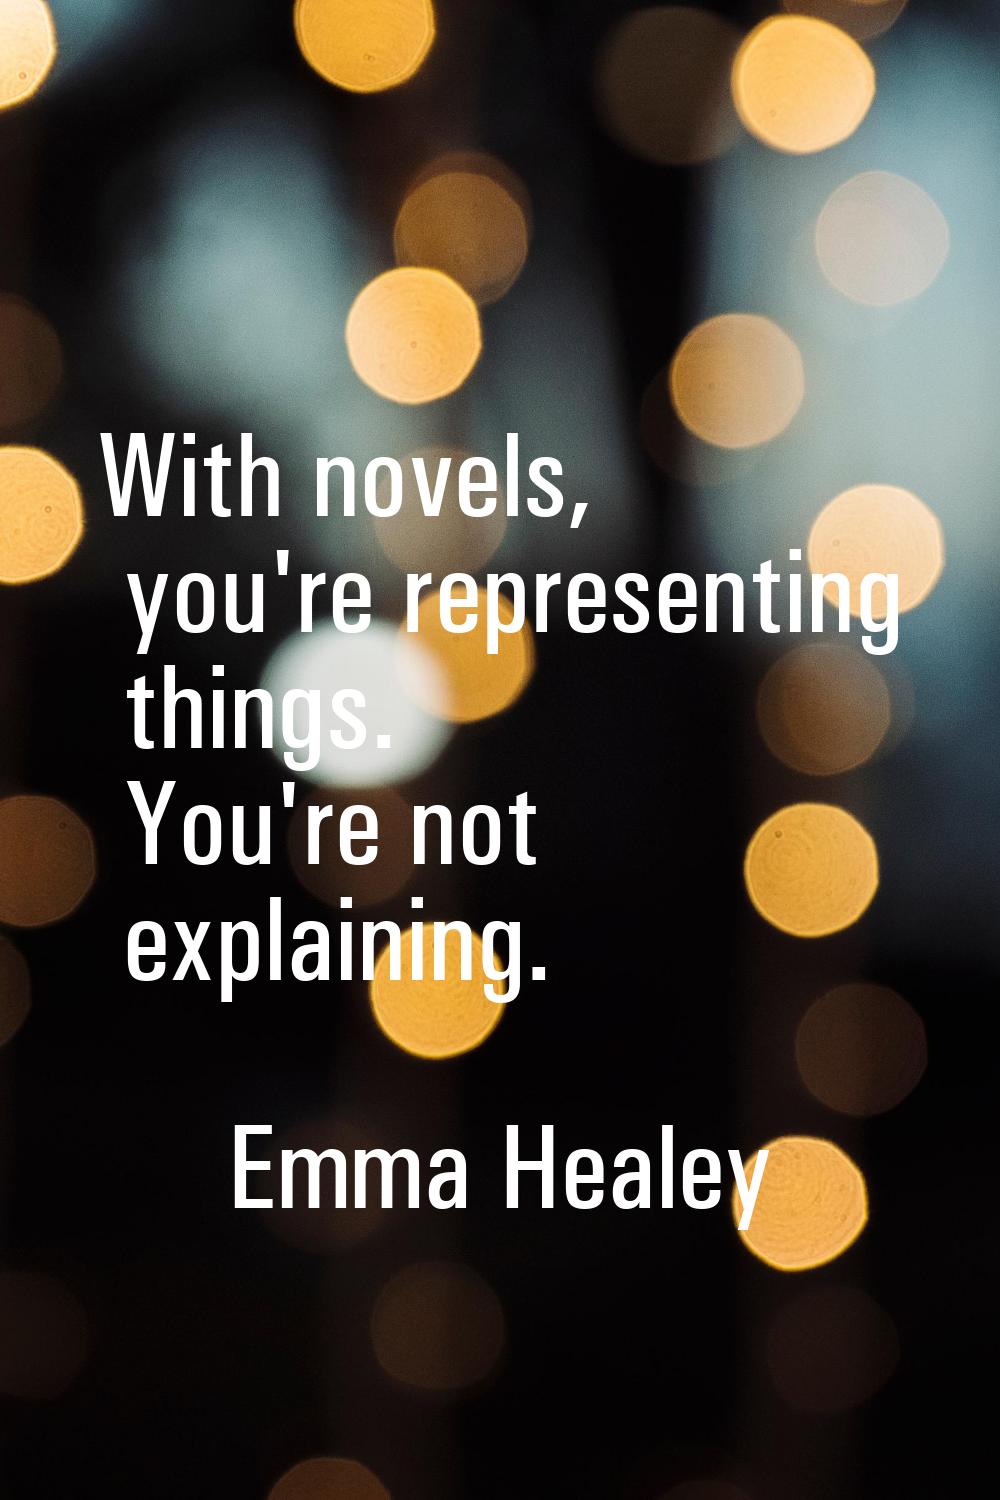 With novels, you're representing things. You're not explaining.